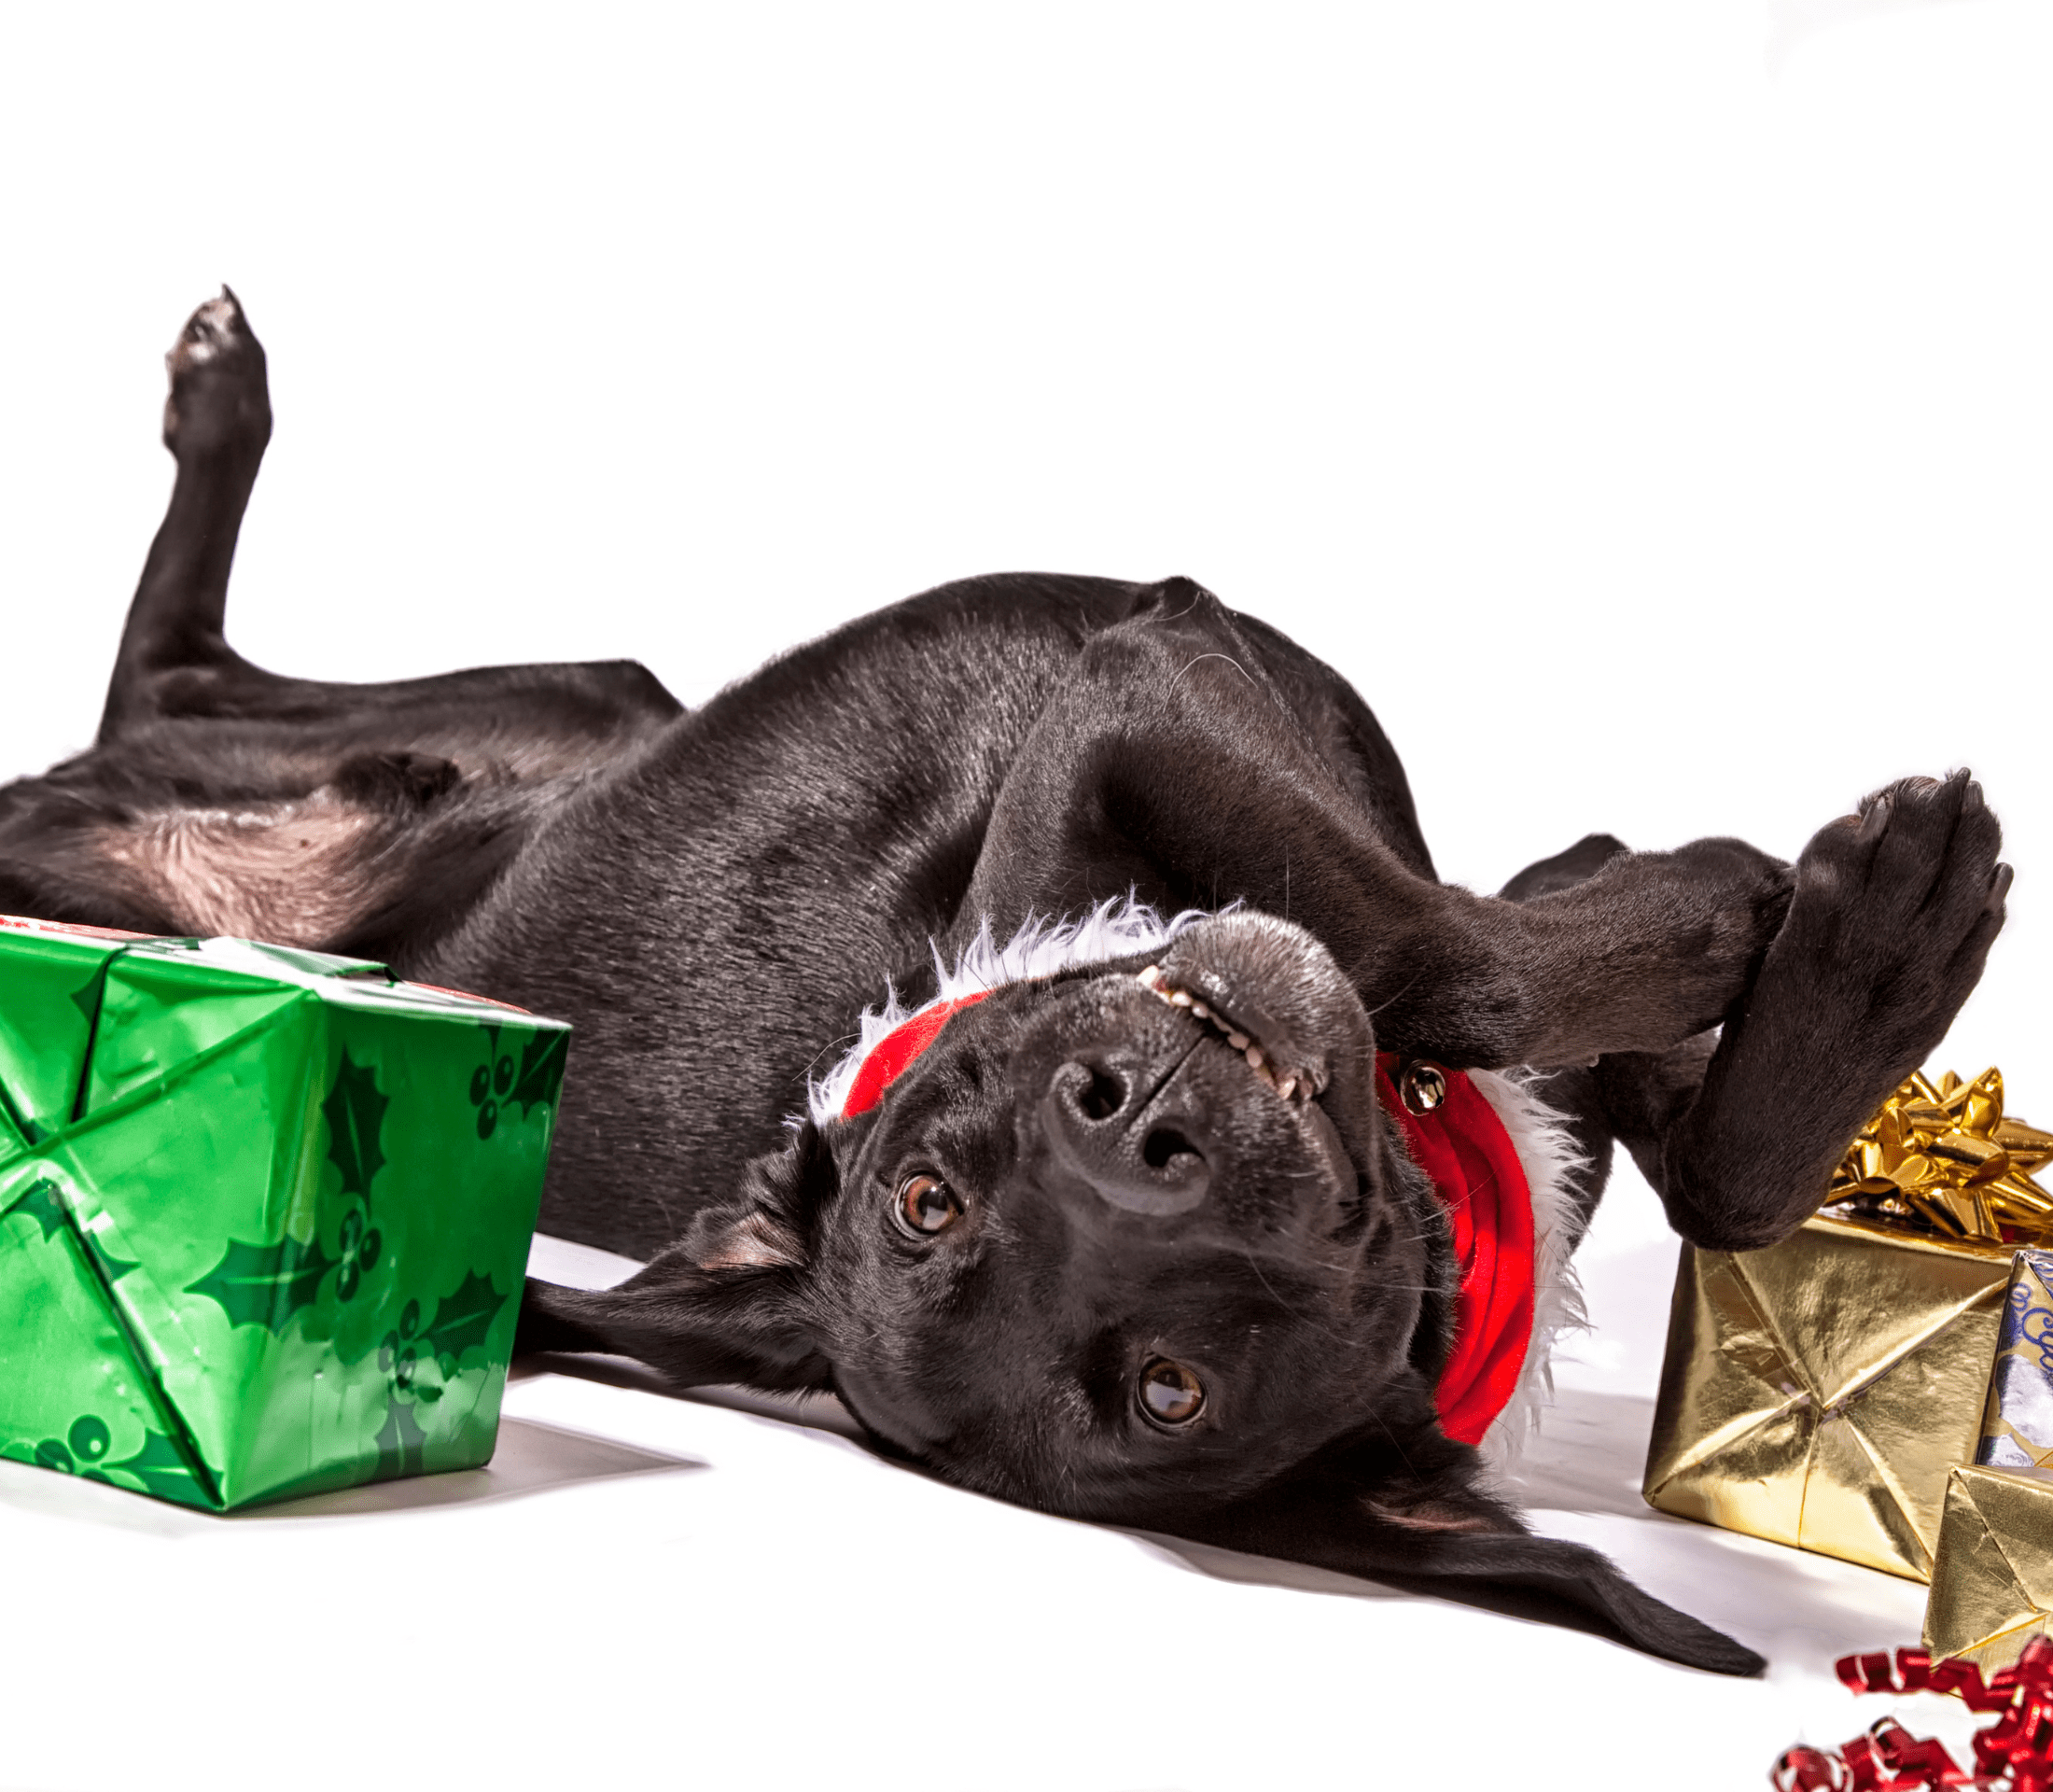 Black dog playing with green and gold gift boxes